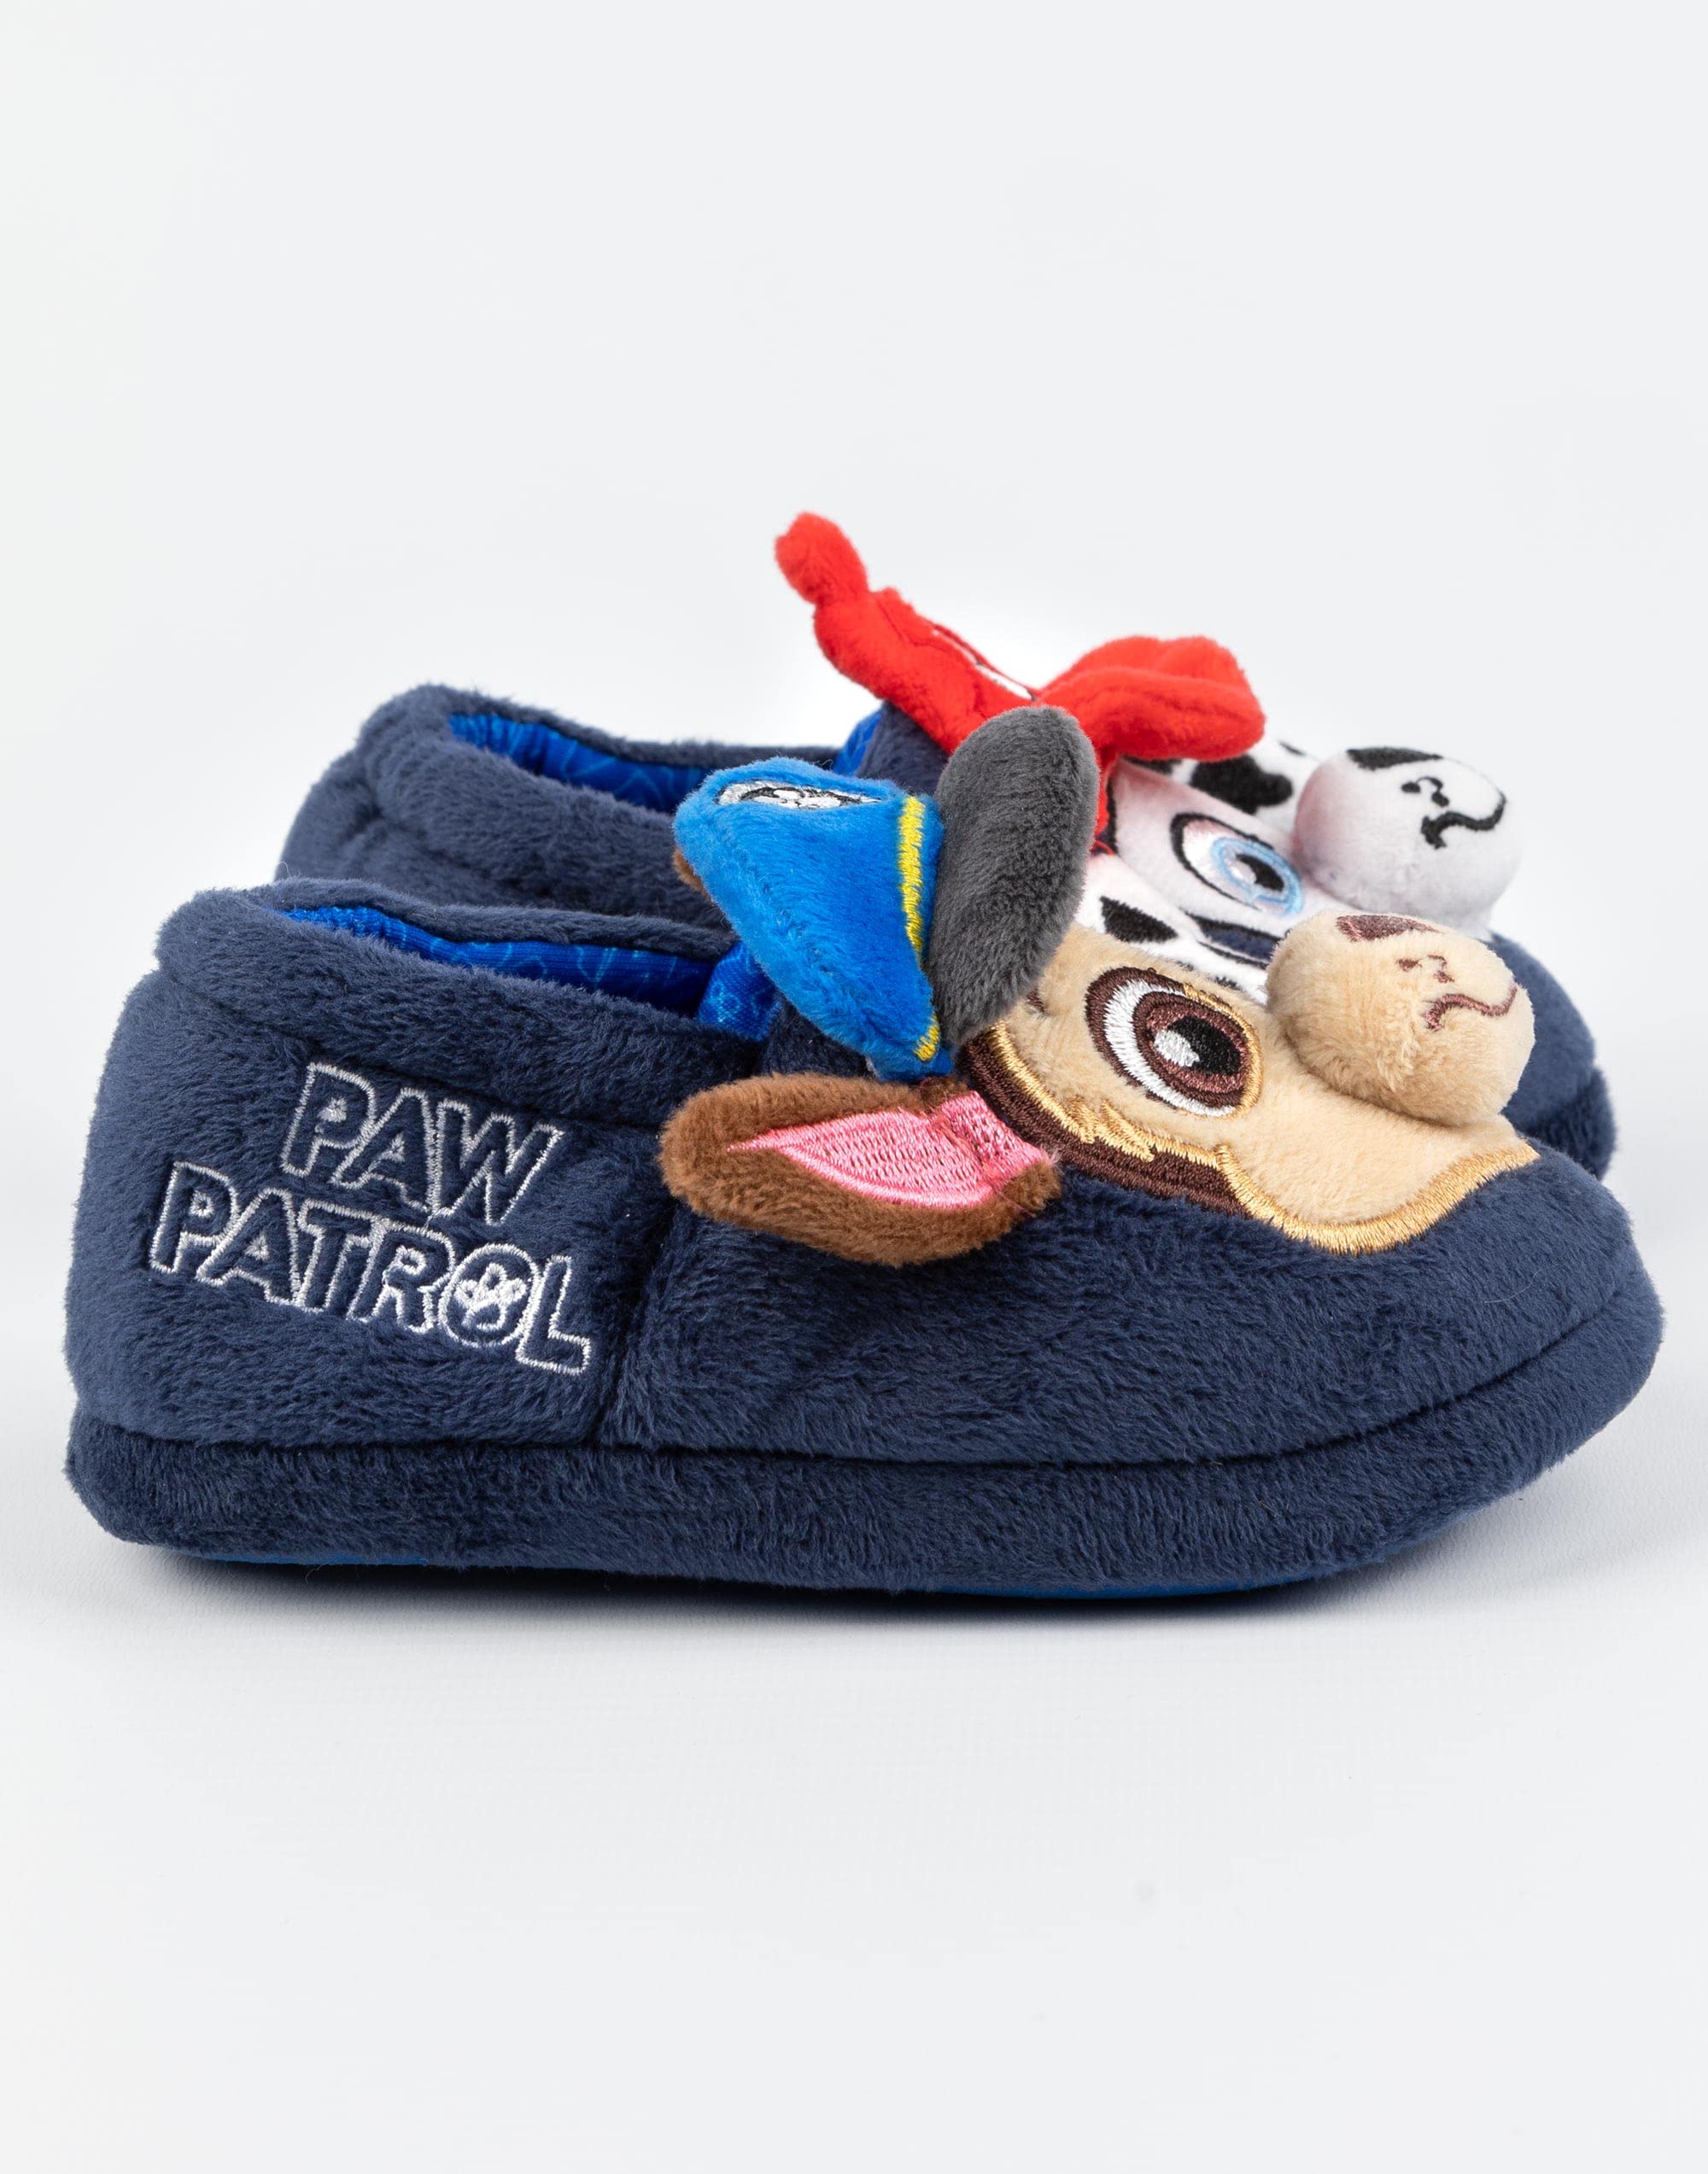 Paw Patrol Slippers Kids Toddlers | Girls Boys Animated Rescue Pups 3D Ears Chase Marshall Slip On House Shoes